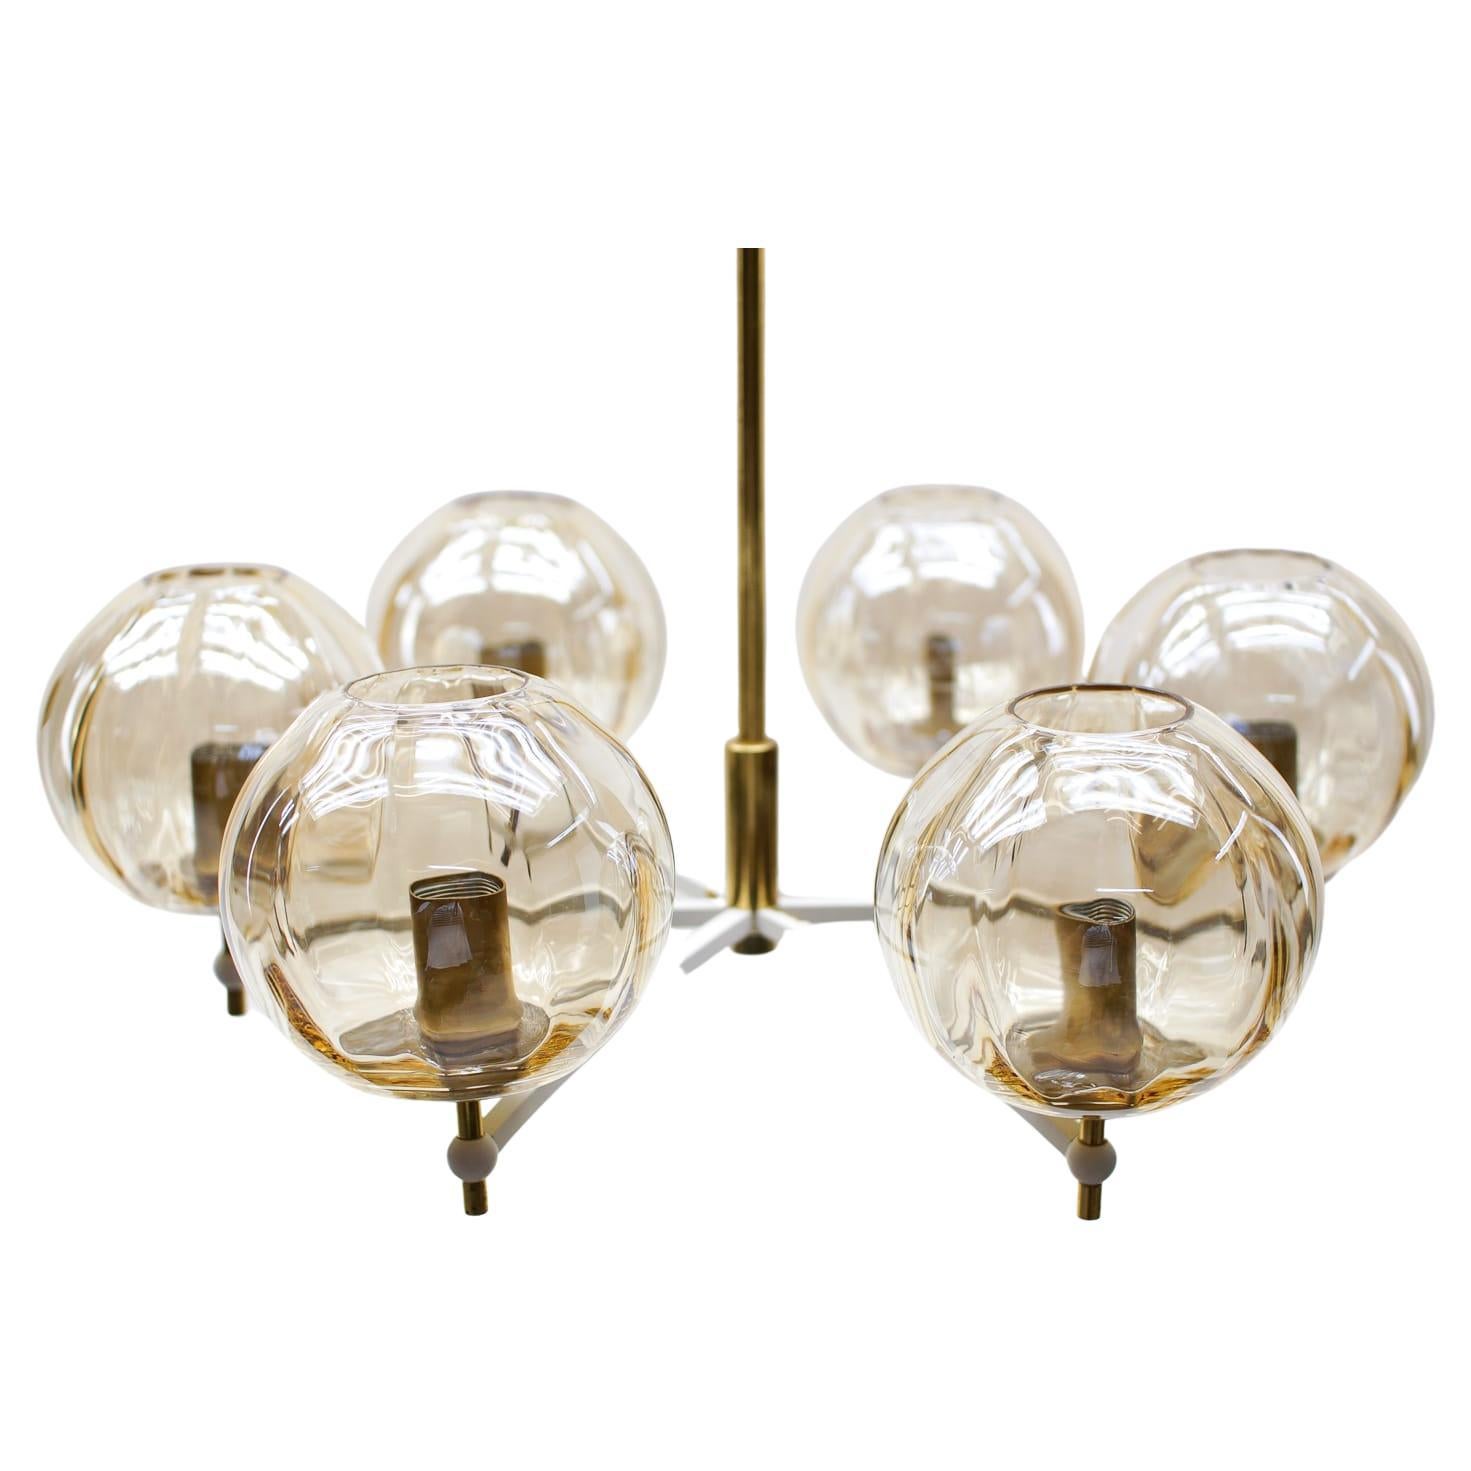 Elegant Mid-Century Modern Orbit Ceiling Lamp in Amber Glass and Brass, 1960s For Sale